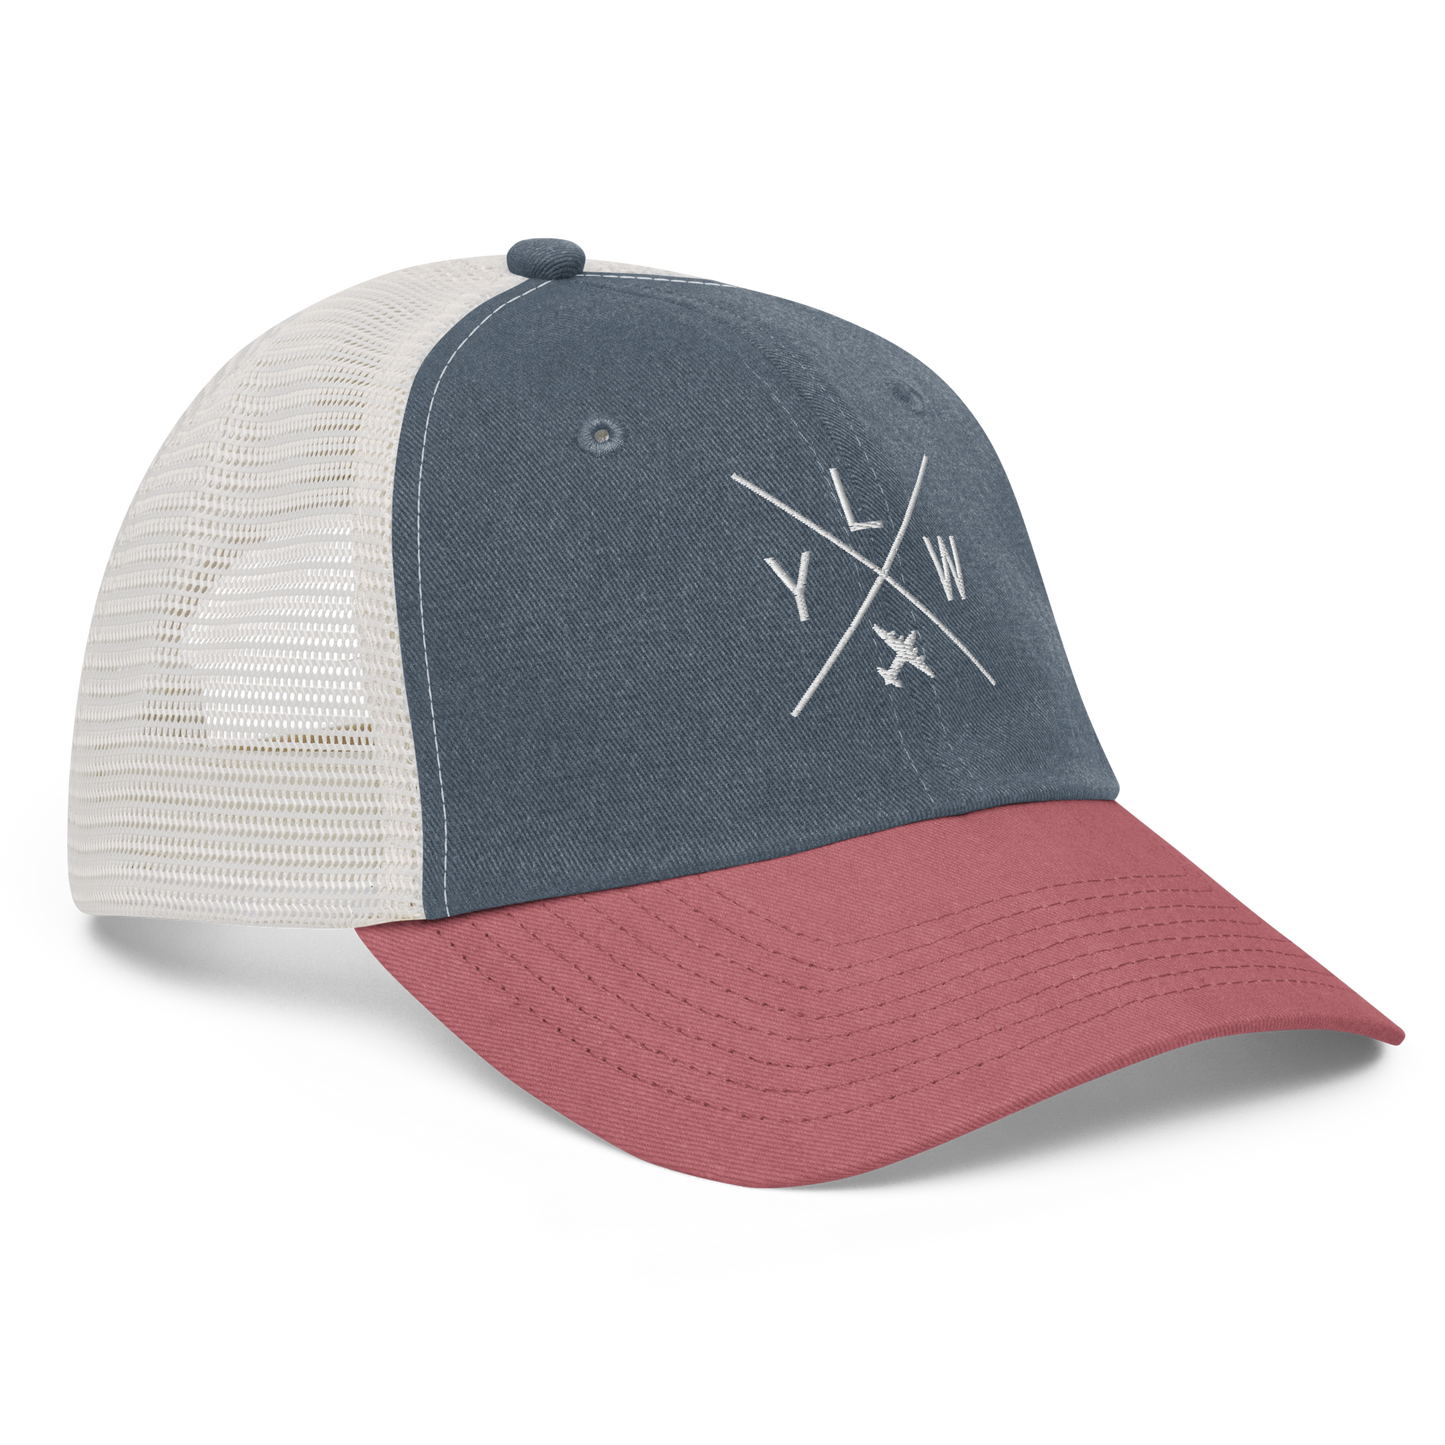 YHM Designs - YLW Kelowna Pigment-Dyed Trucker Cap - Crossed-X Design with Airport Code and Vintage Propliner - White Embroidery - Image 13